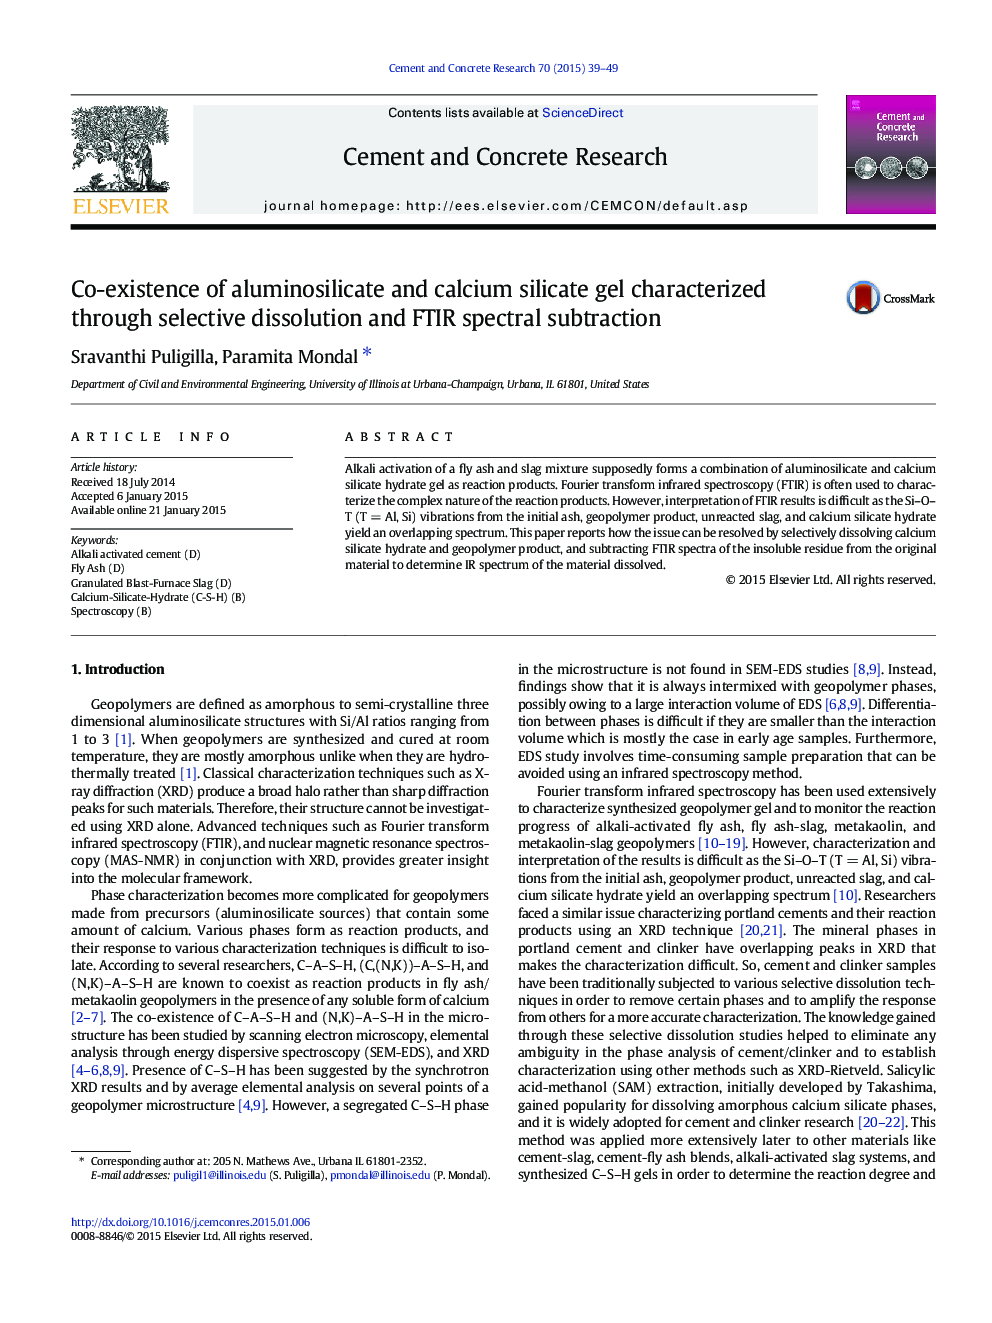 Co-existence of aluminosilicate and calcium silicate gel characterized through selective dissolution and FTIR spectral subtraction